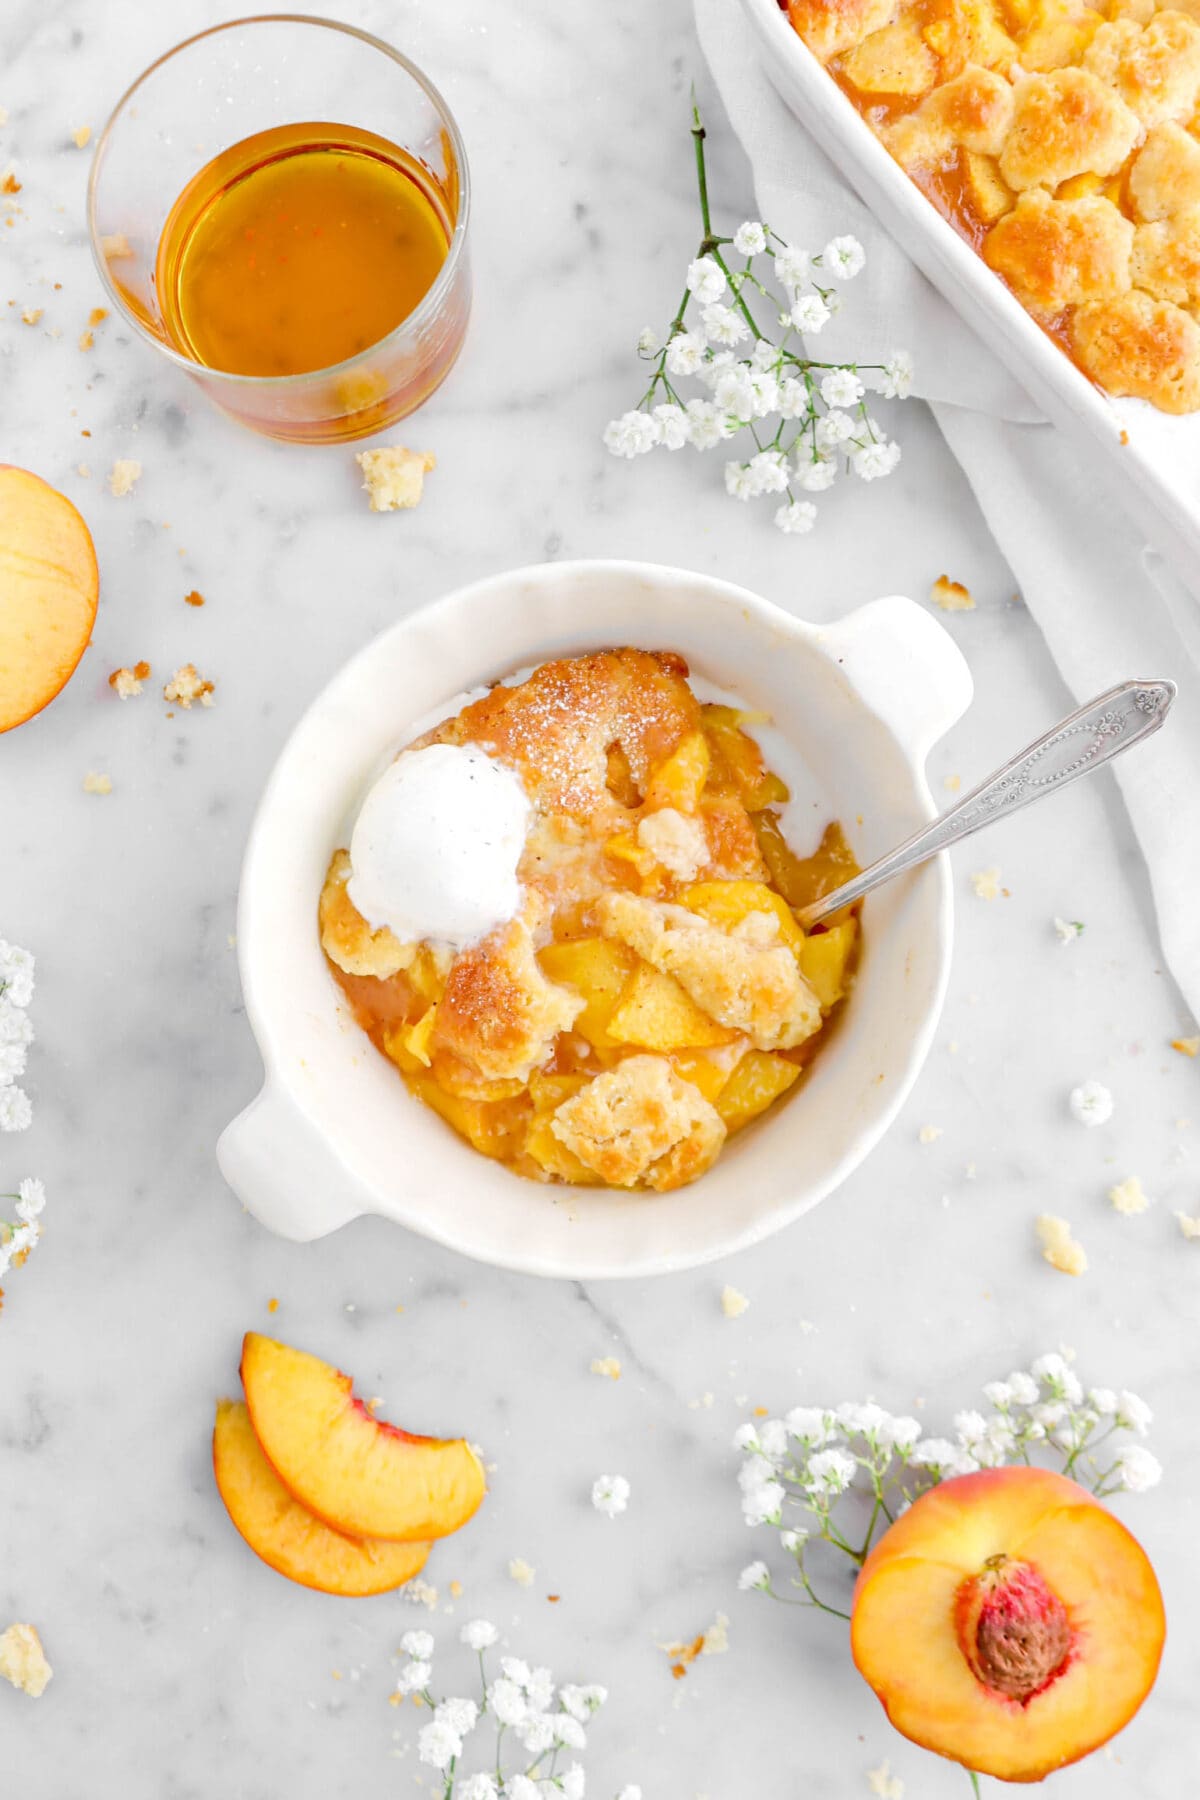 peach cobbler in small ceramic pie pan with glass of bourbon and flowers around